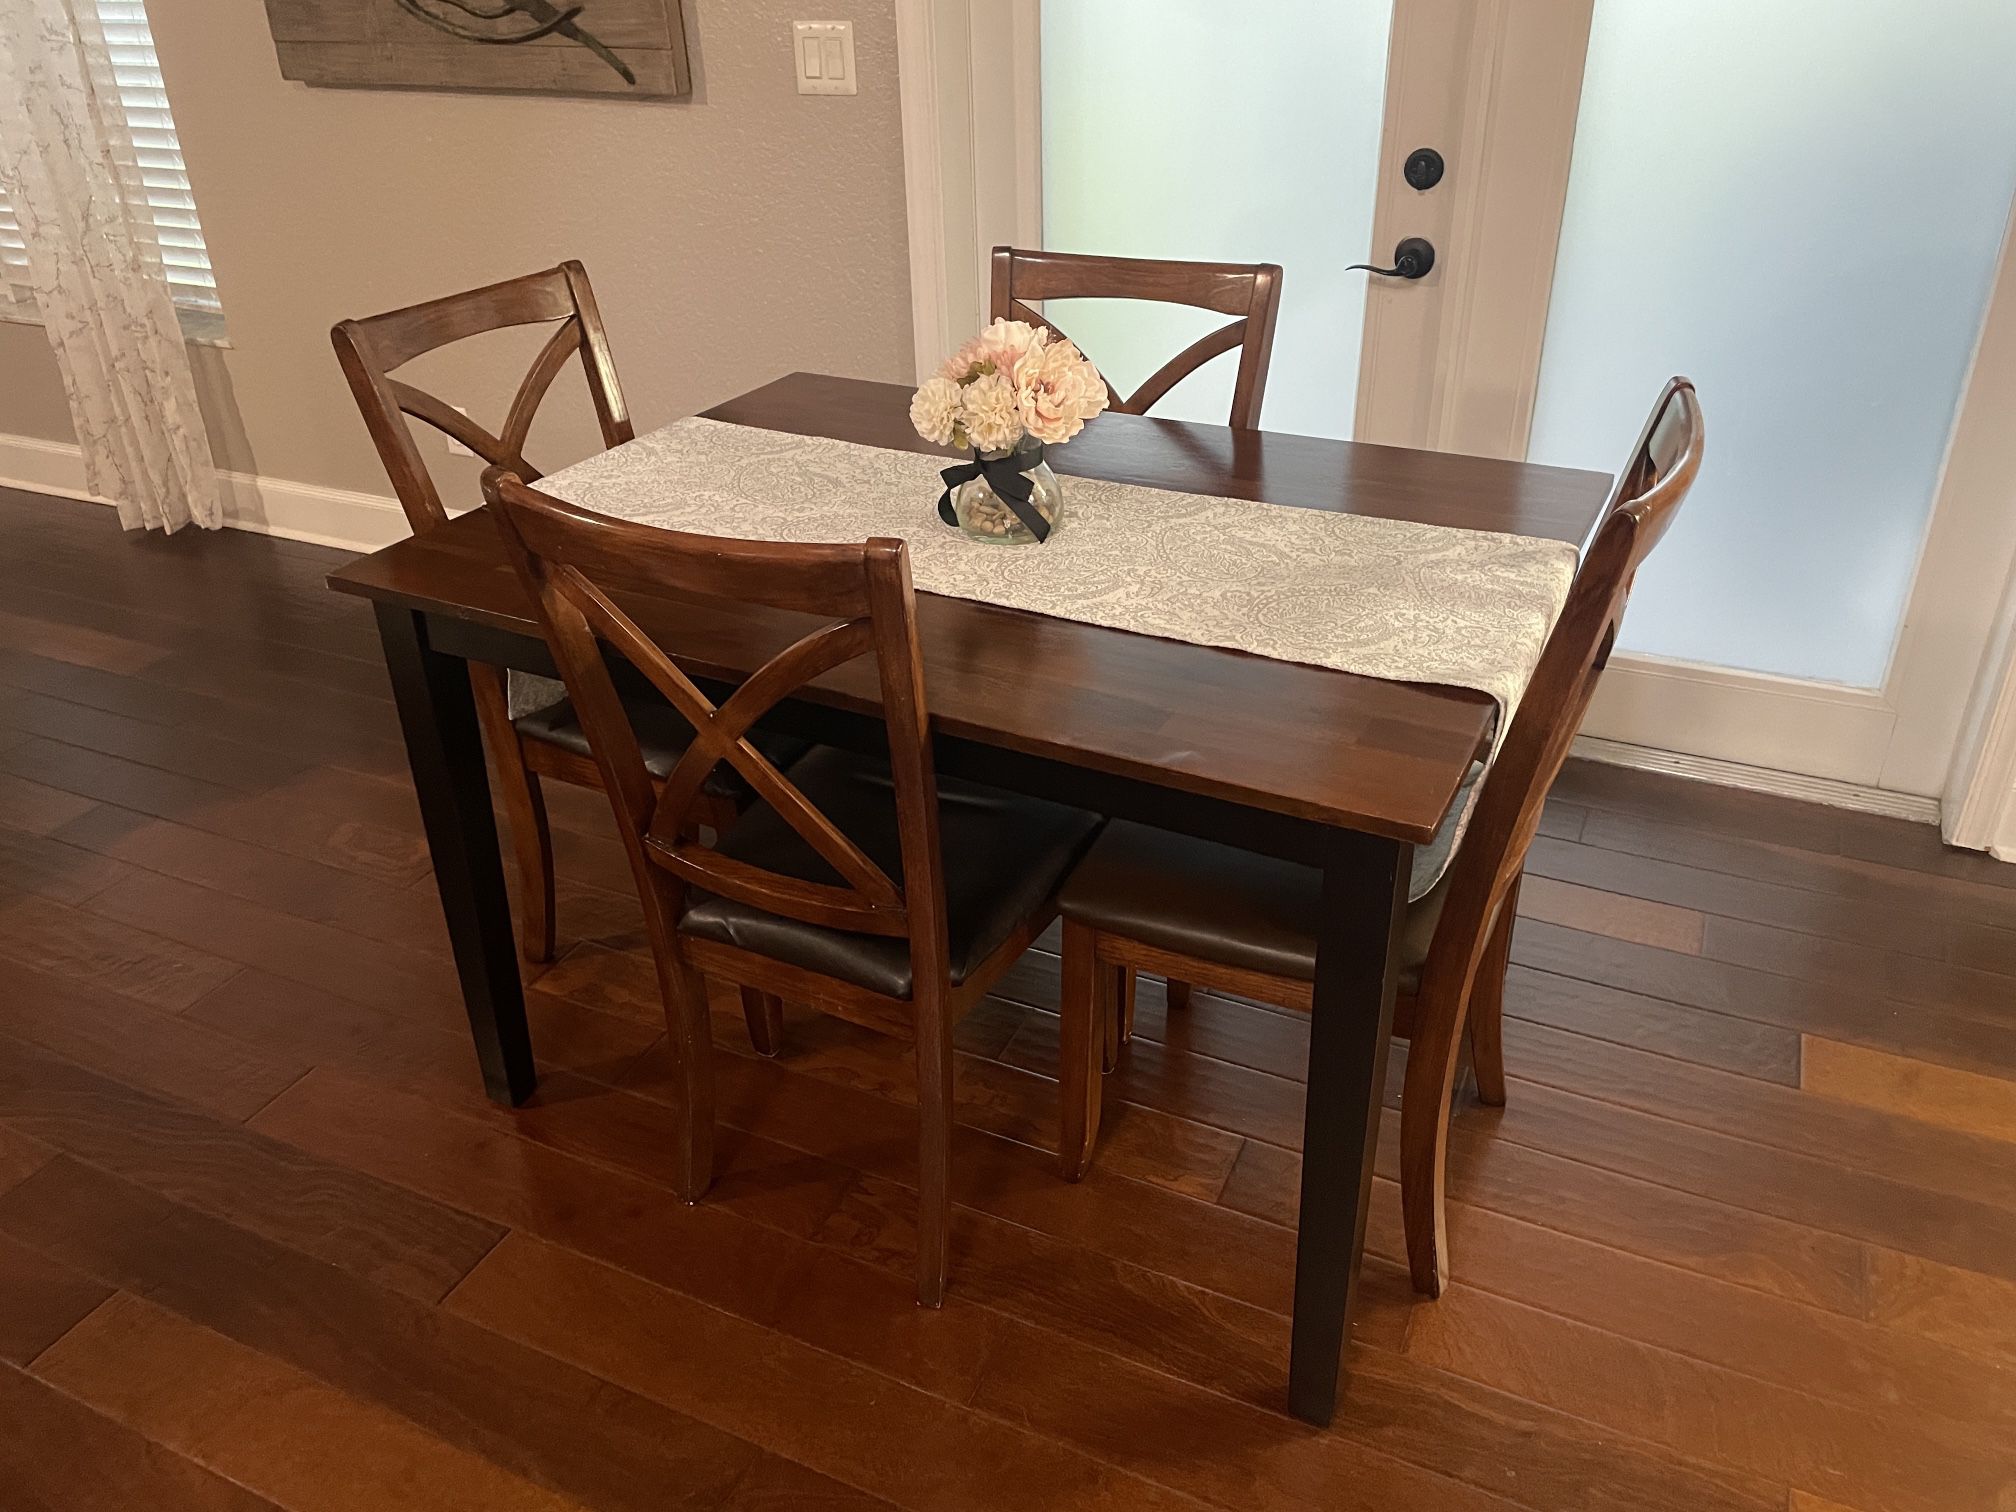  Wood Kitchen or Dining Room Table With 4 chairs